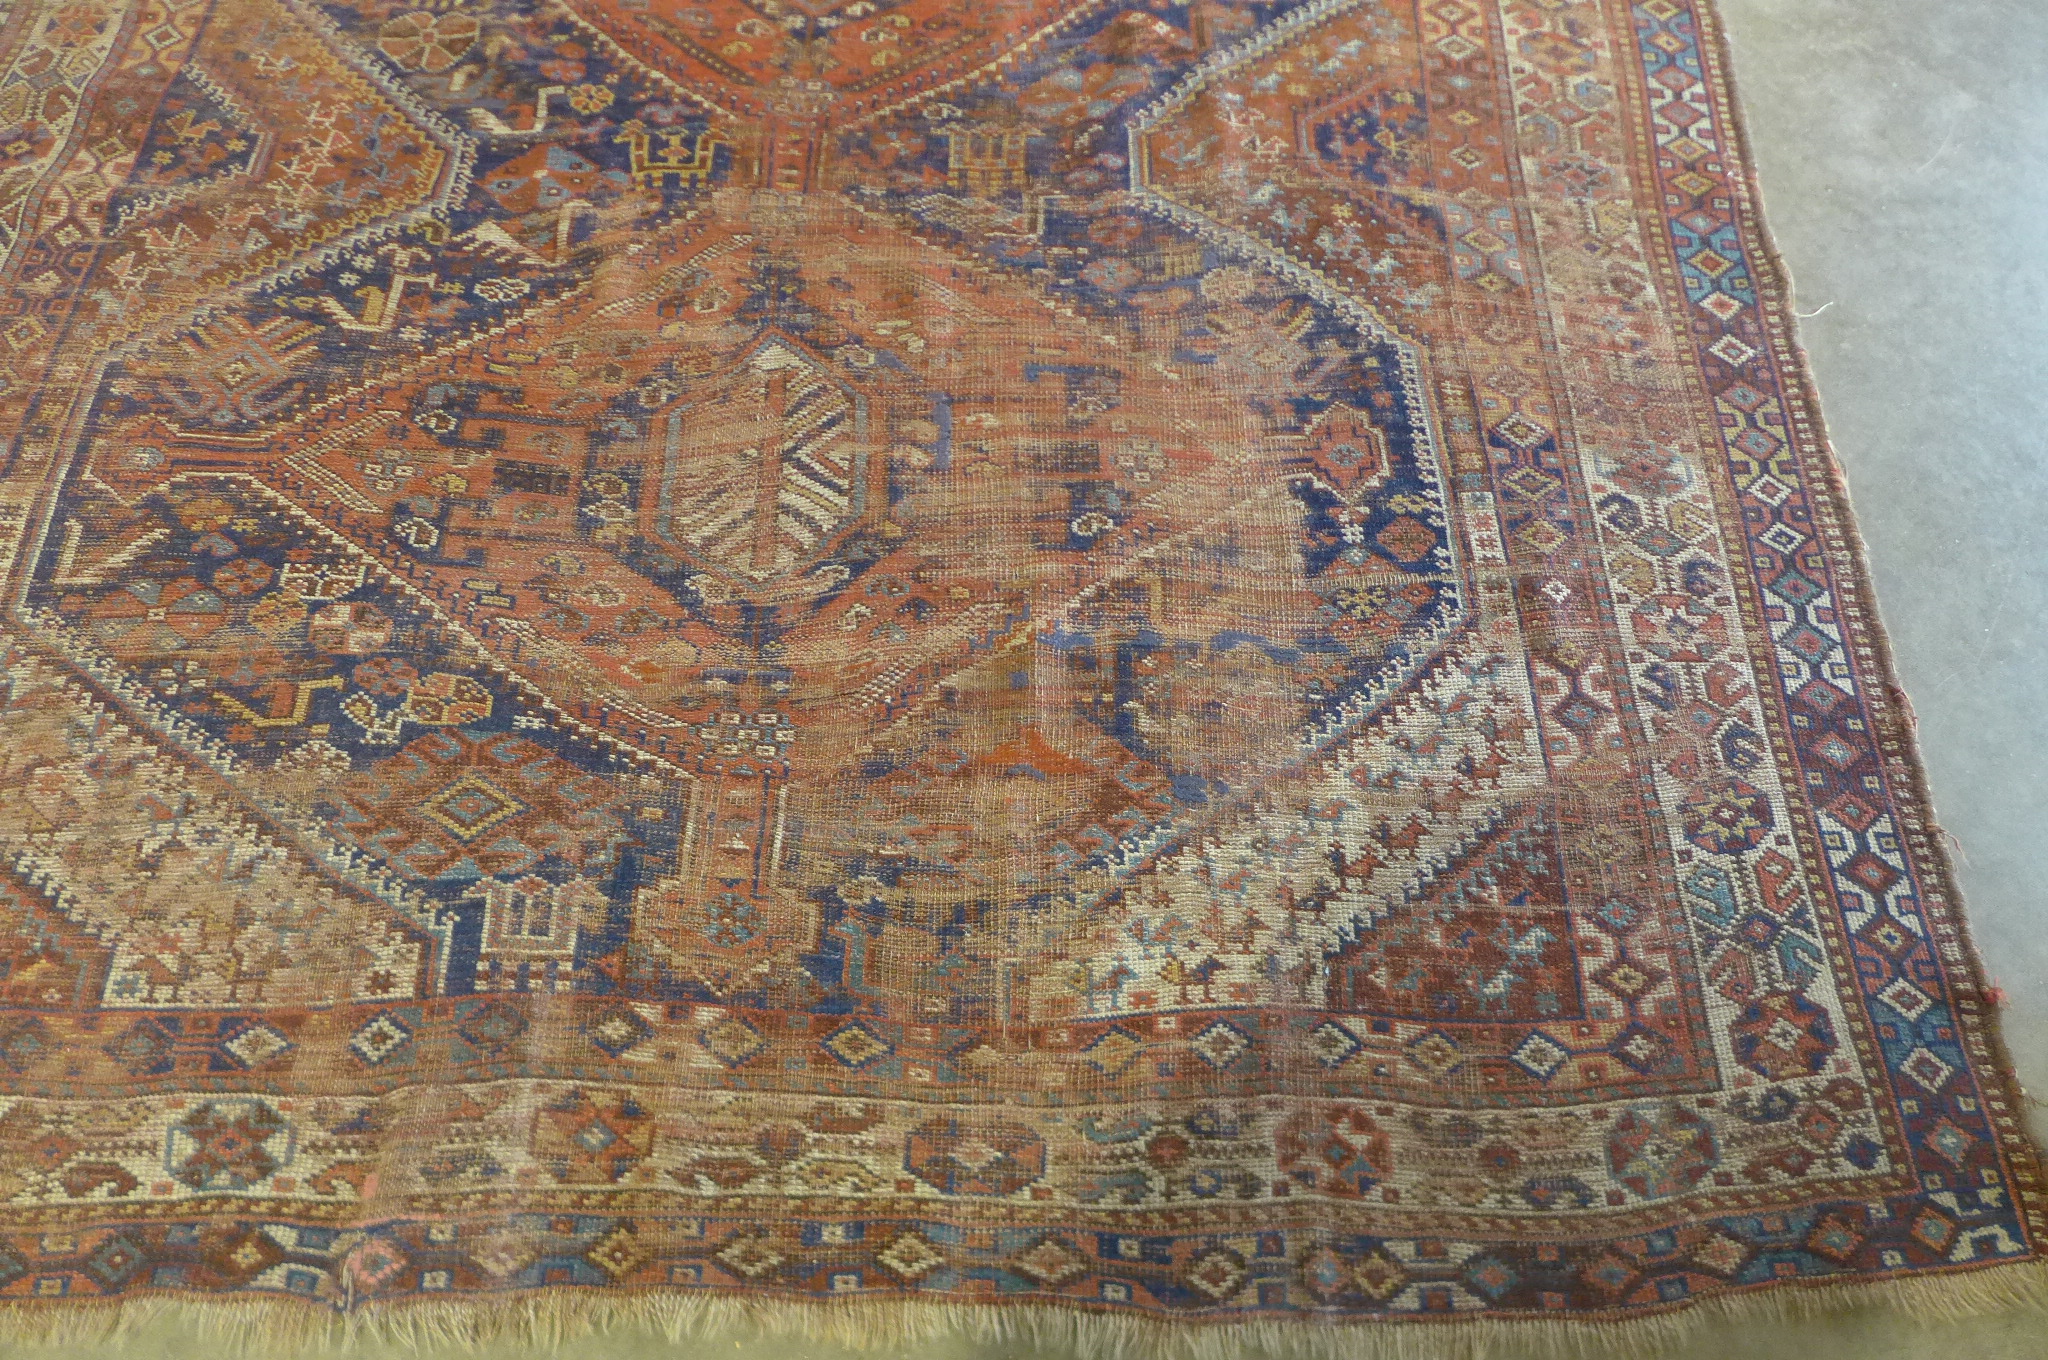 A vintage hand knotted Eastern woollen rug, 302cm x 206cm, in worn condition and some fading - Image 2 of 8